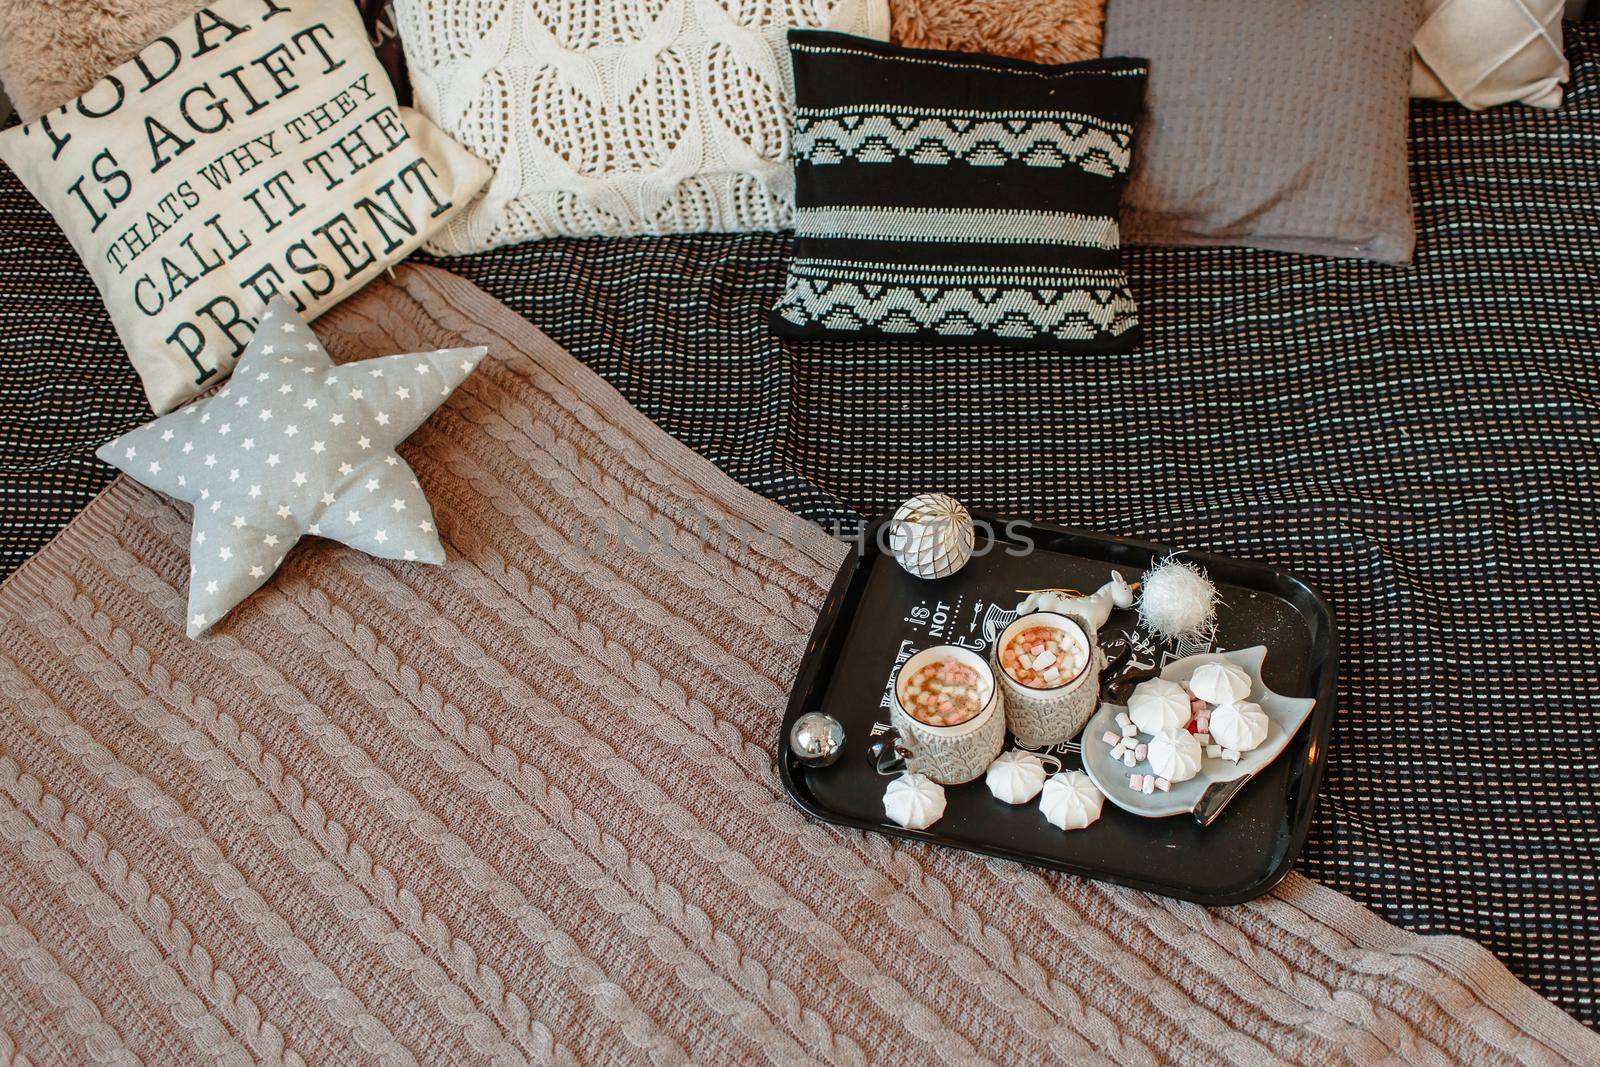 Coffee with marshmallows on a tray on the bed by deandy